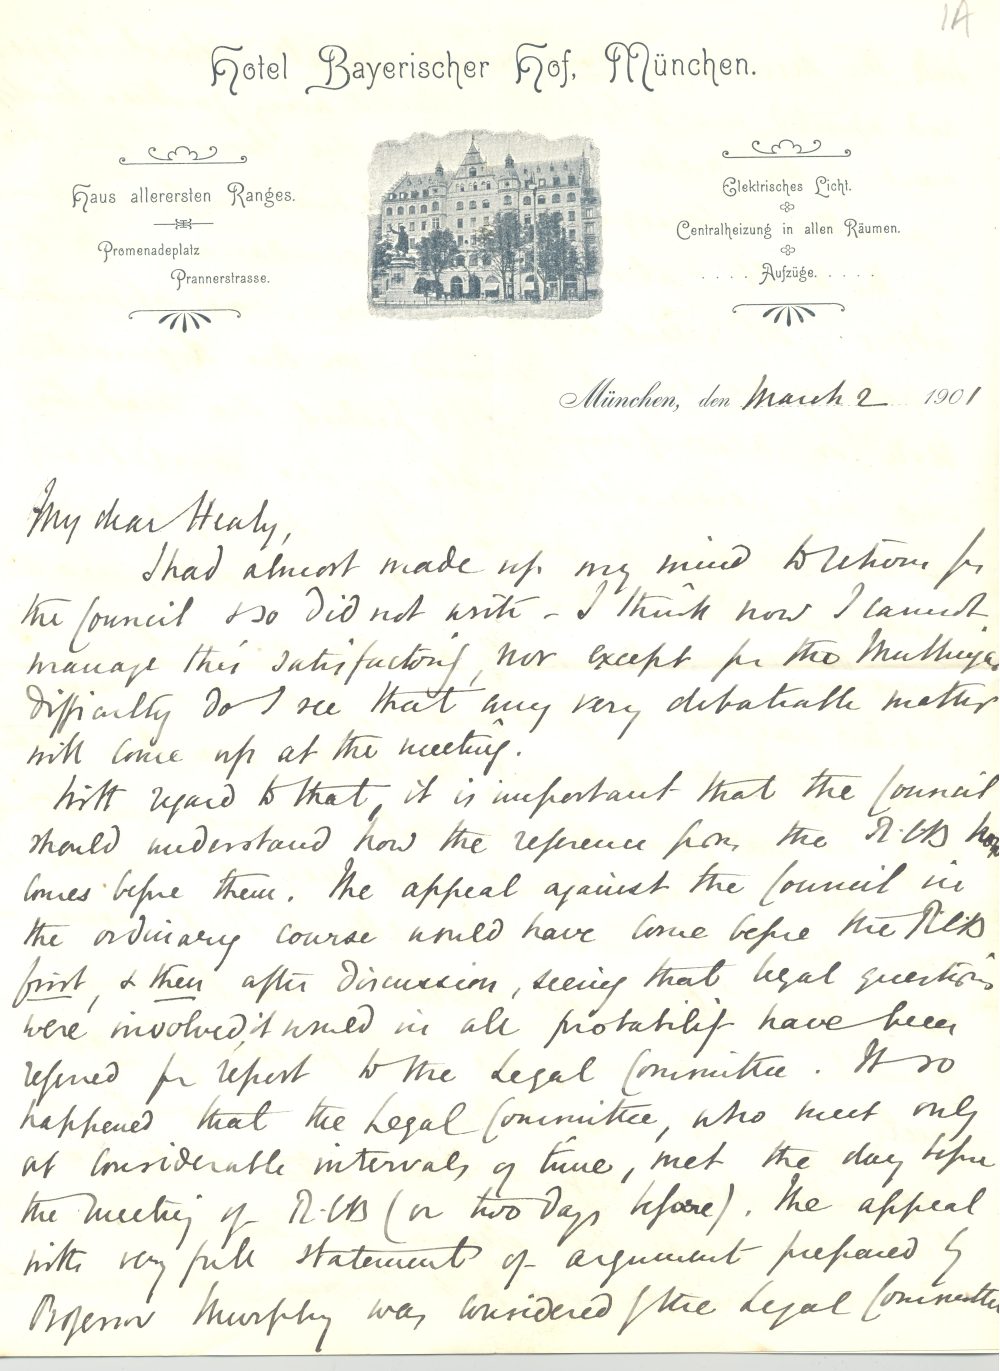 Letter from the Most Revd James Bennet Keane, Munich to Revd John Healy, keeping in touch with diocesan business, 2 March 1901, RCB Library D7/19/1/5/1